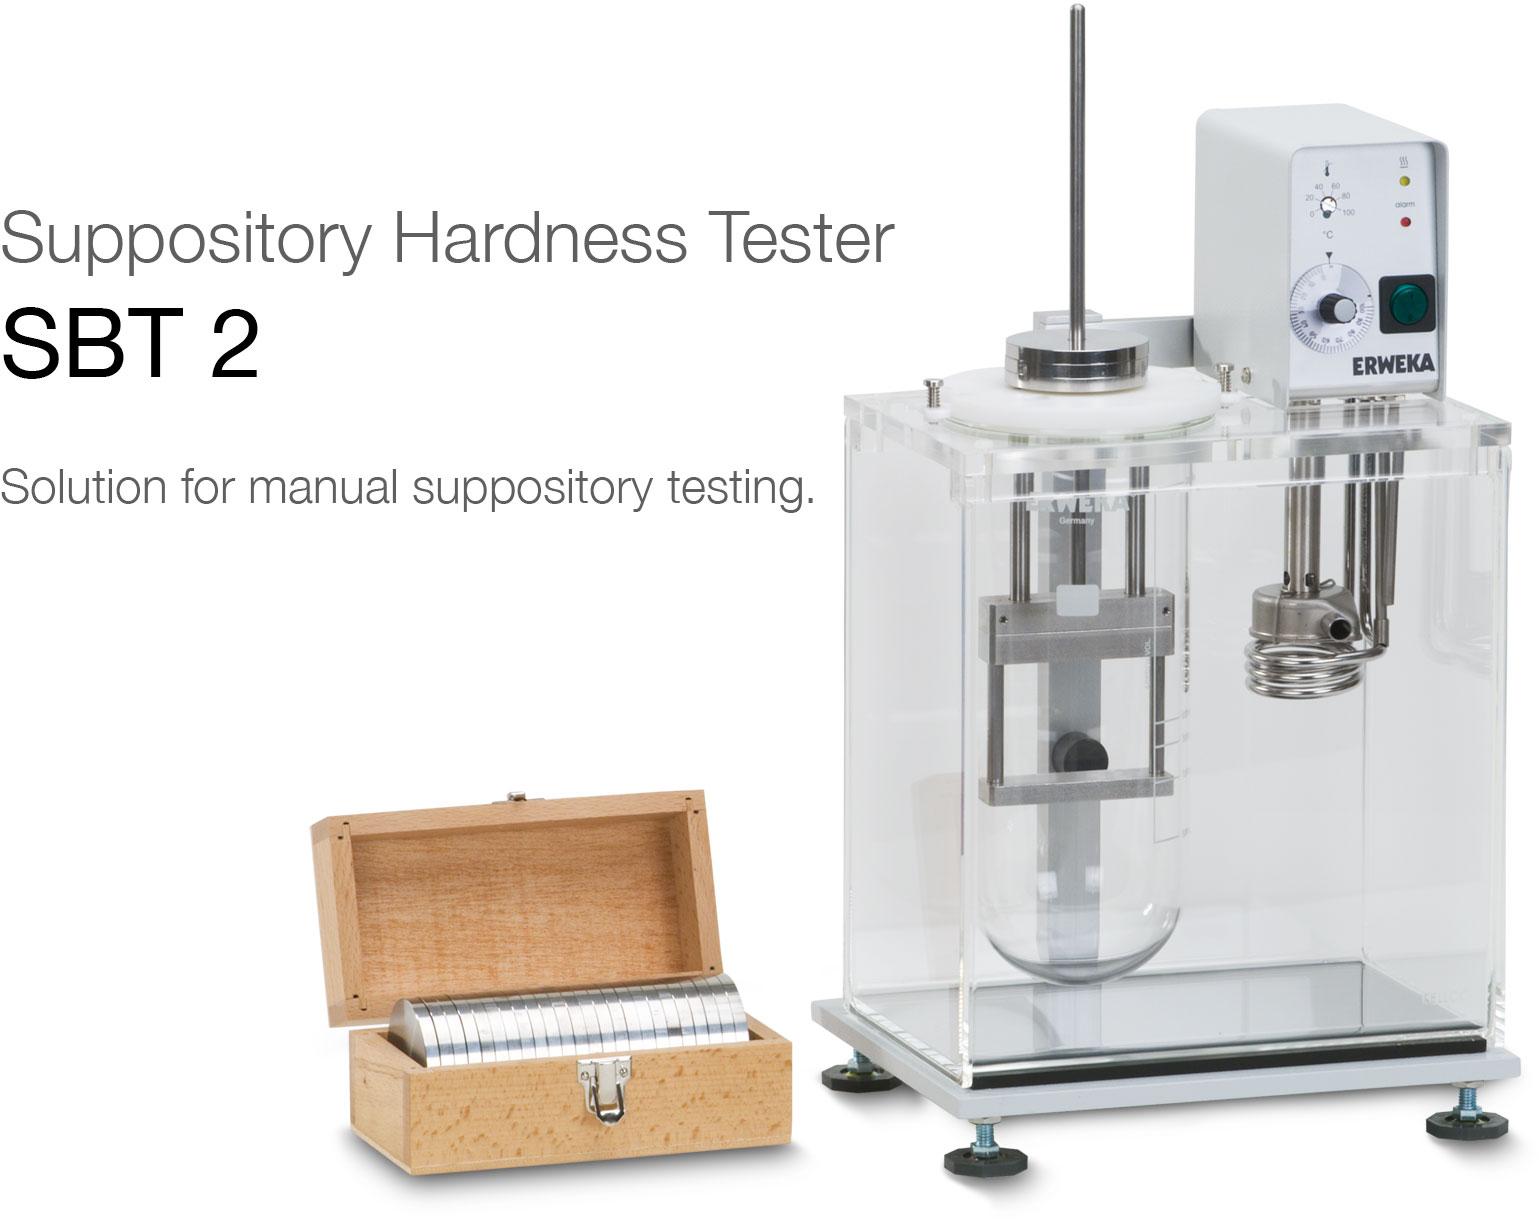 Suppository hardness tester SBT 2